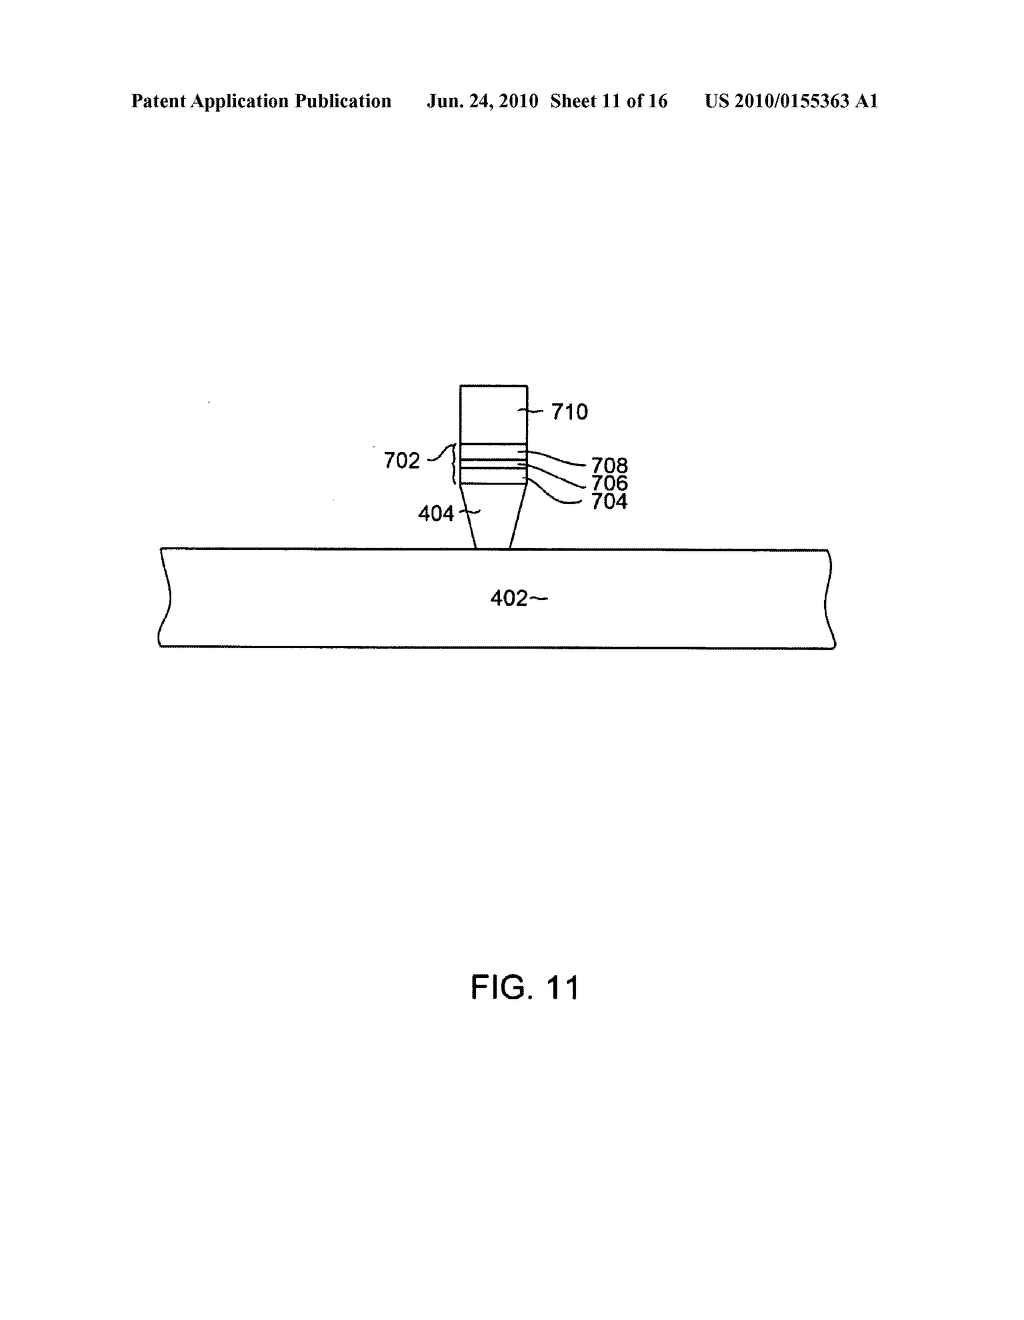 METHOD FOR MANUFACTURING A MAGNETIC WRITE HEAD HAVING A WRITE POLE WITH A TRAILING EDGE TAPER USING A RIEABLE HARD MASK - diagram, schematic, and image 12